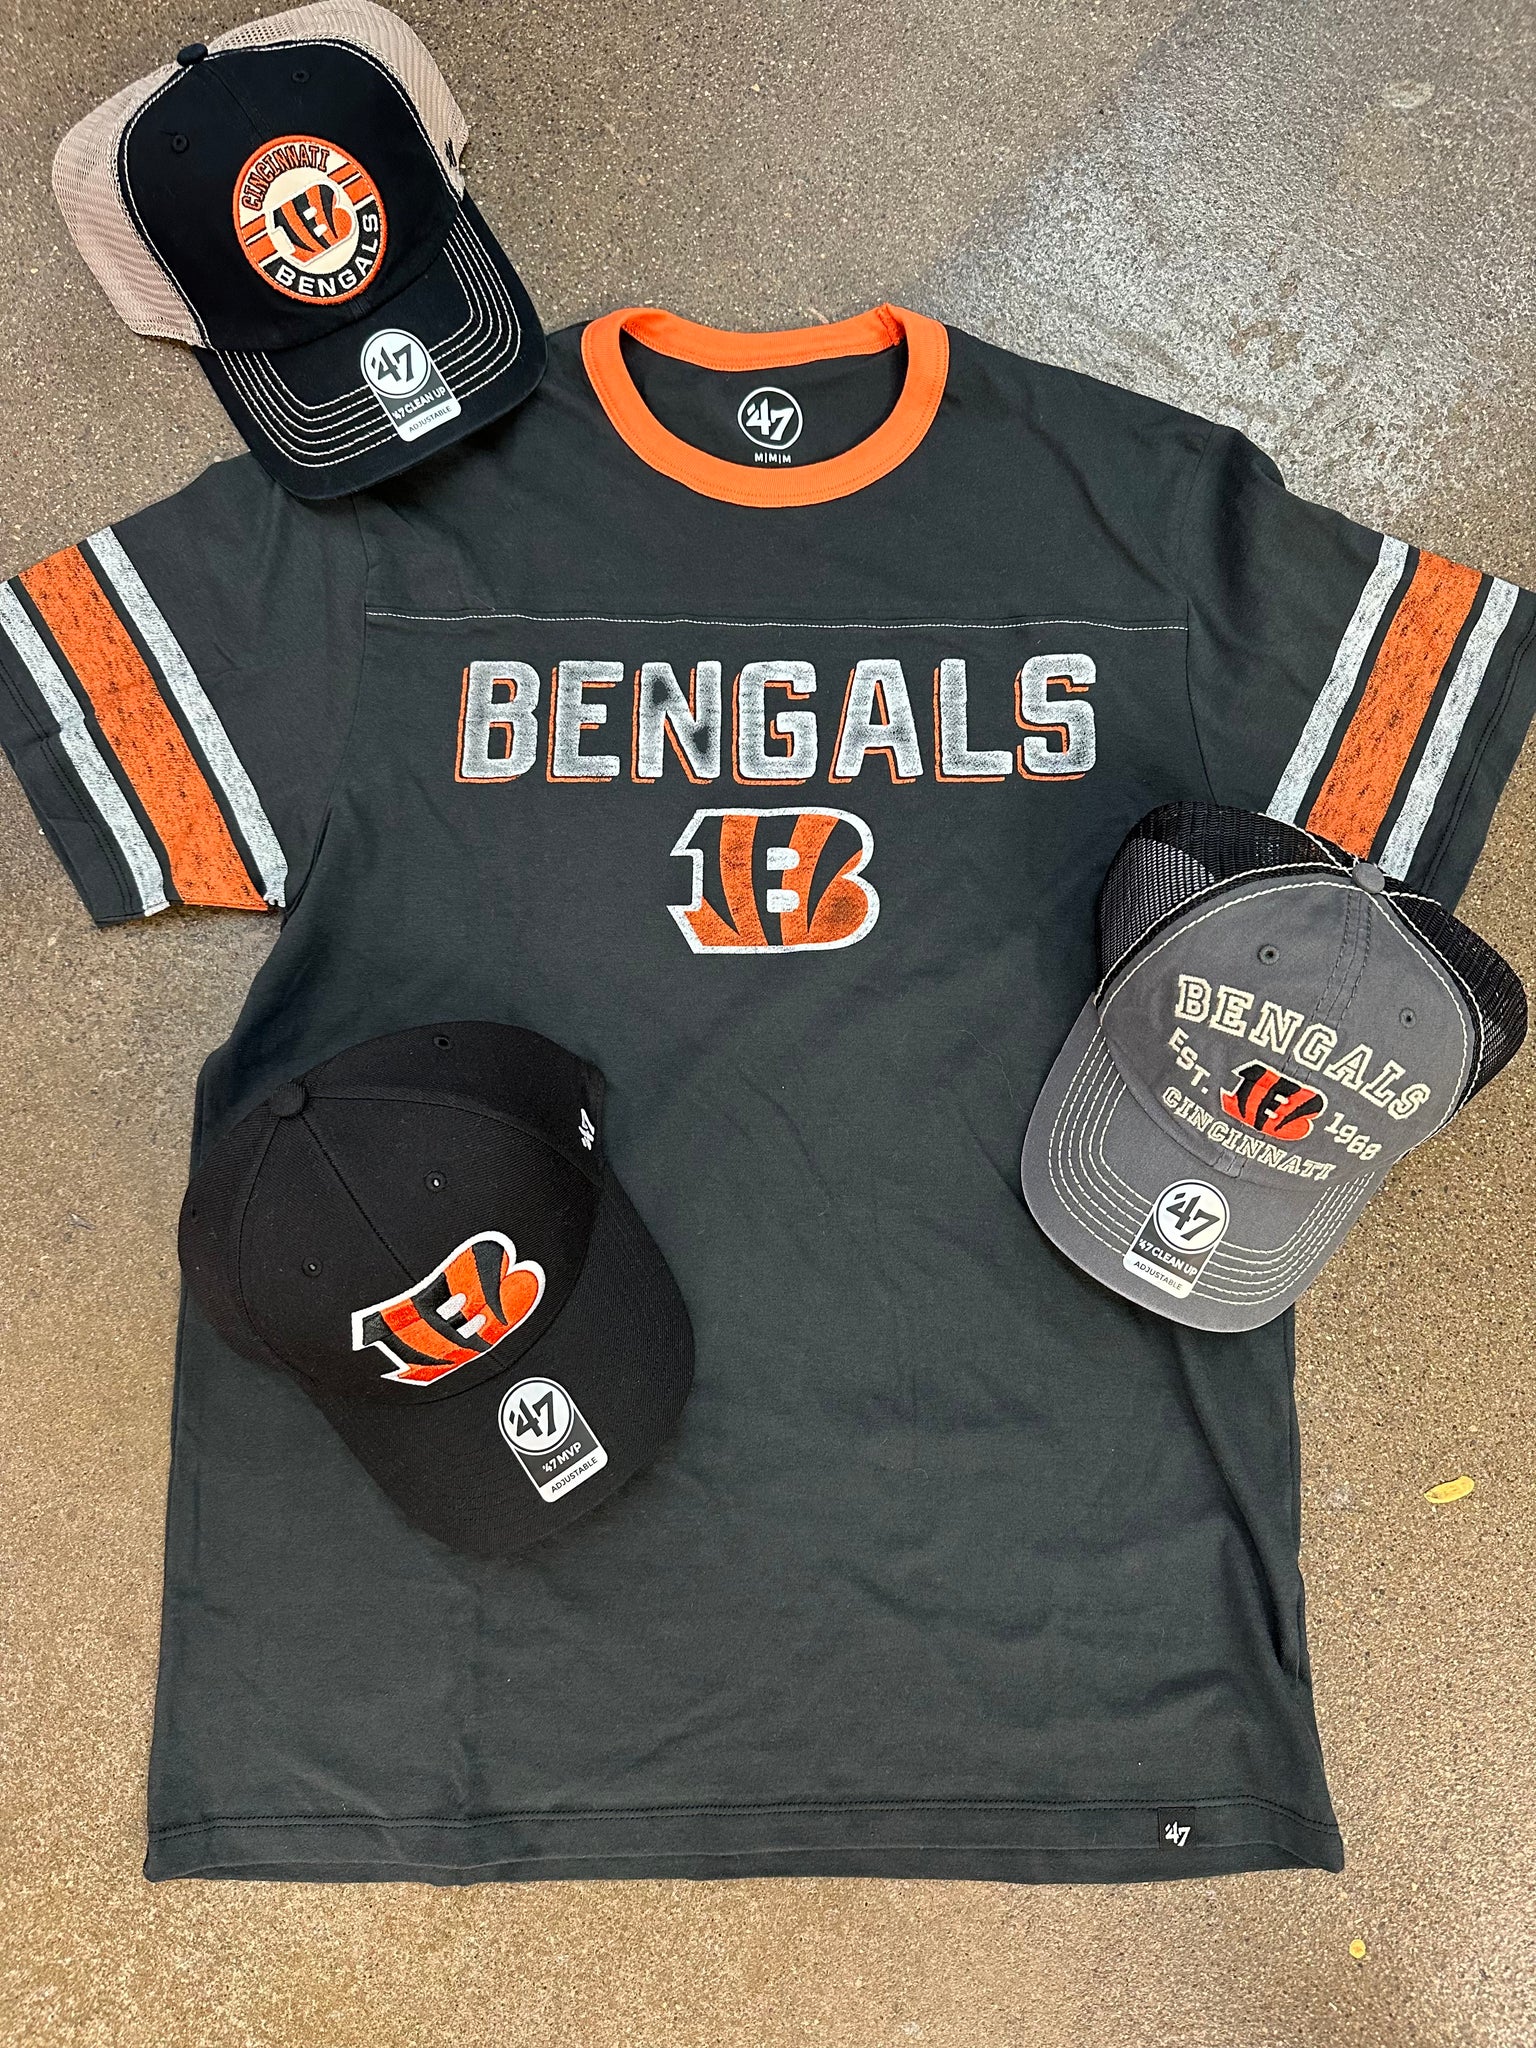 all bengals clothing